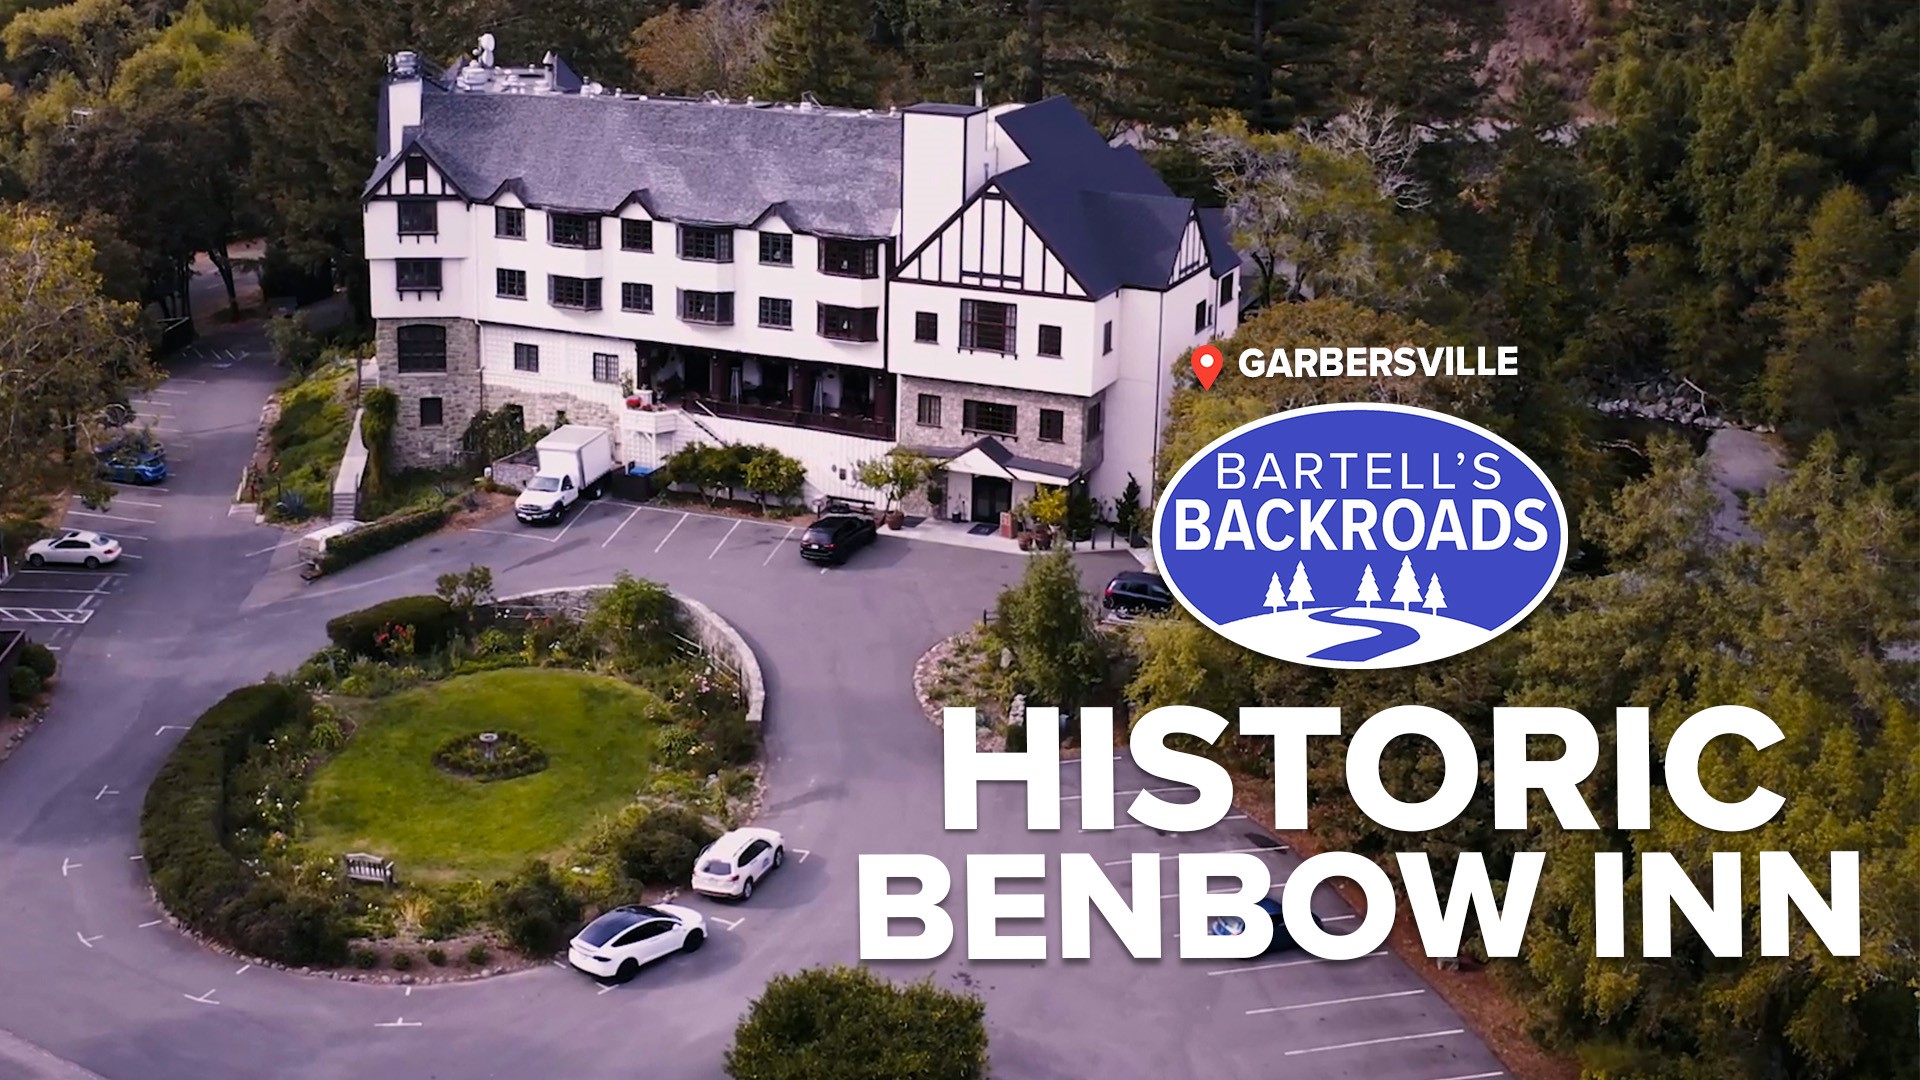 Built by nine brothers and sisters nearly a century ago, the Benbow Inn has attracted weary travelers, as well as world leaders.